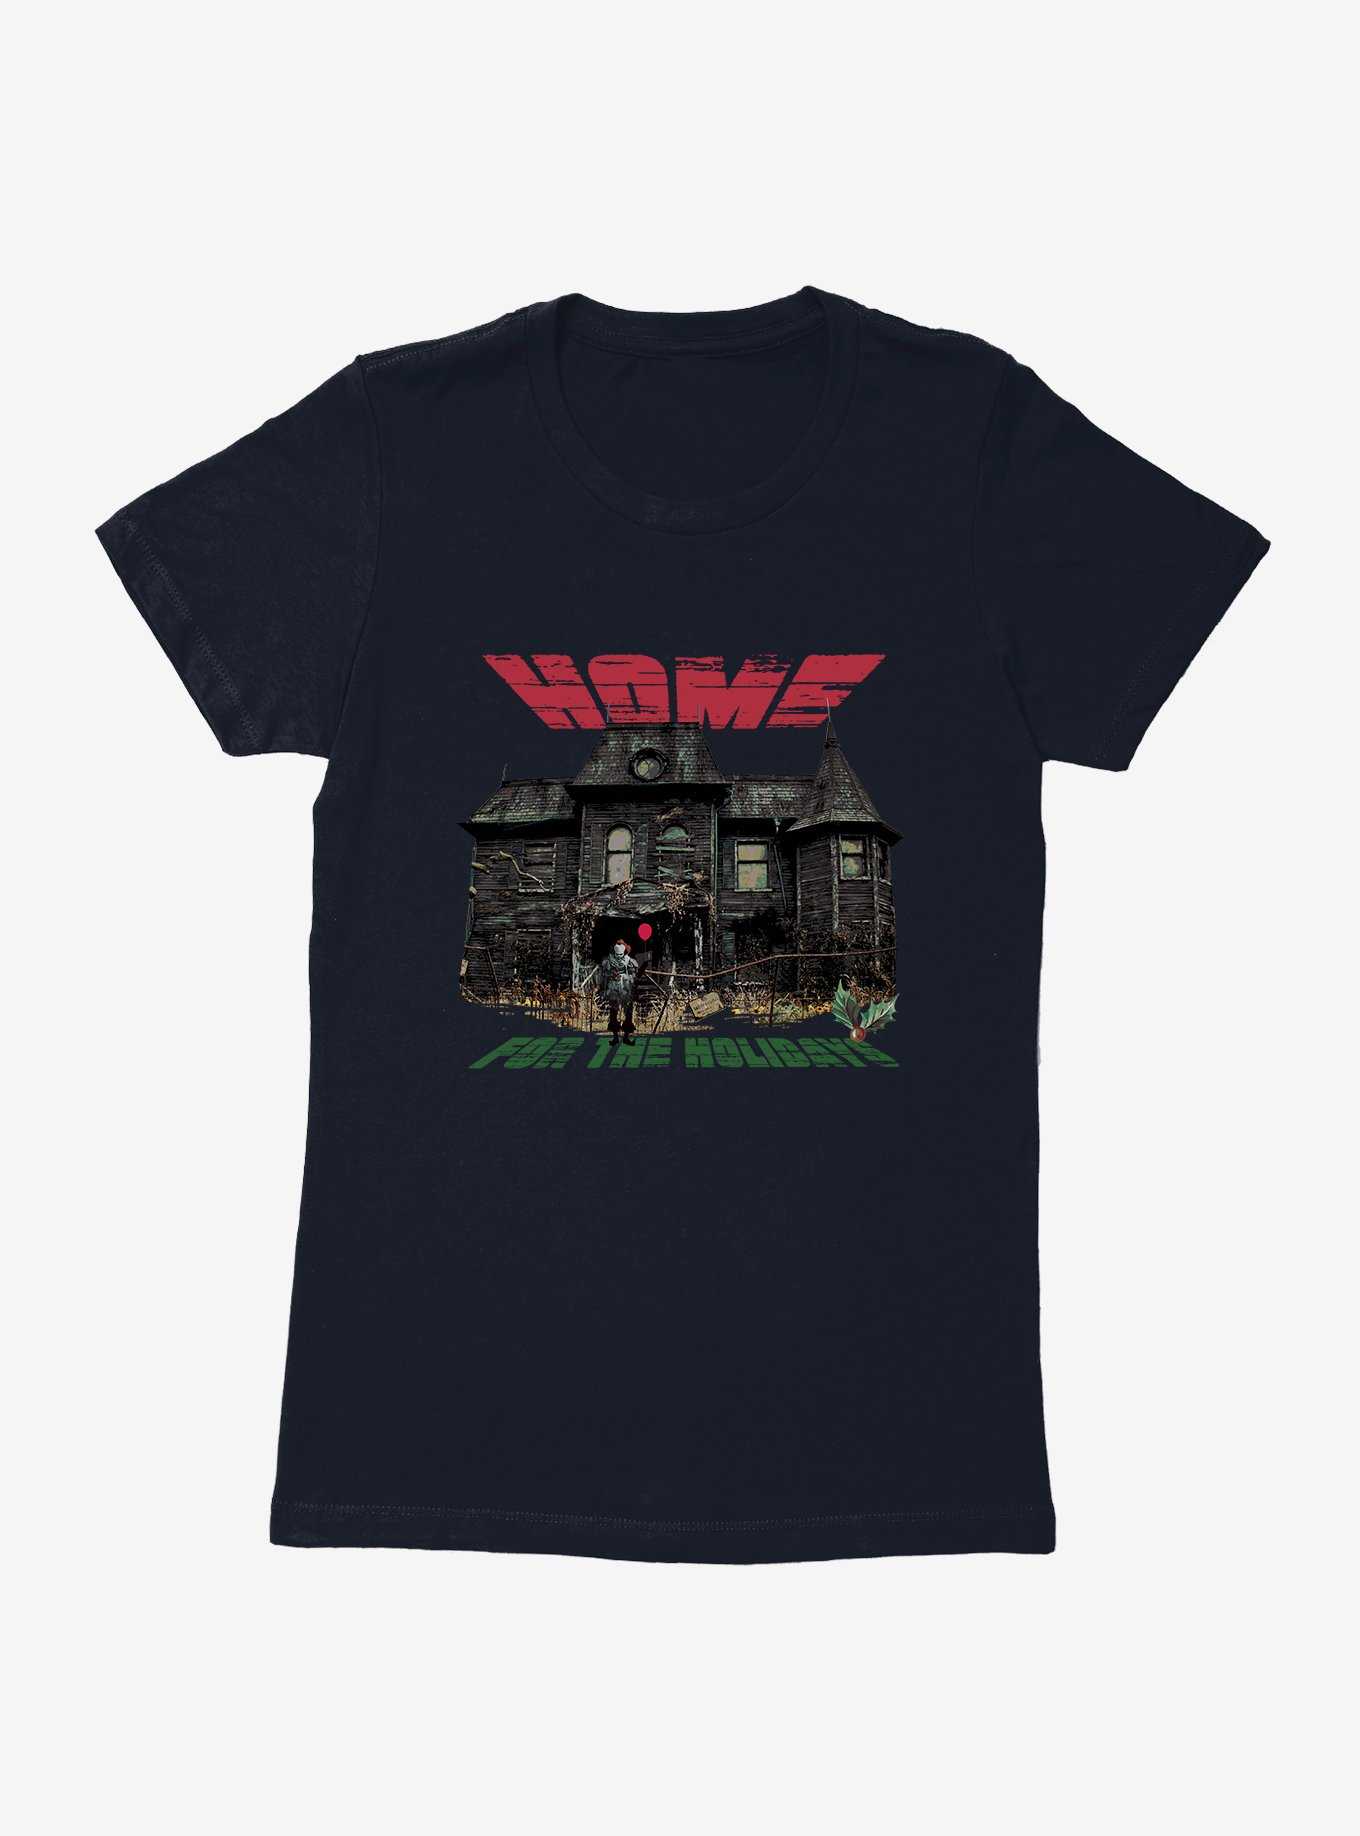 IT Home For The Holidays Womens T-Shirt, MIDNIGHT NAVY, hi-res